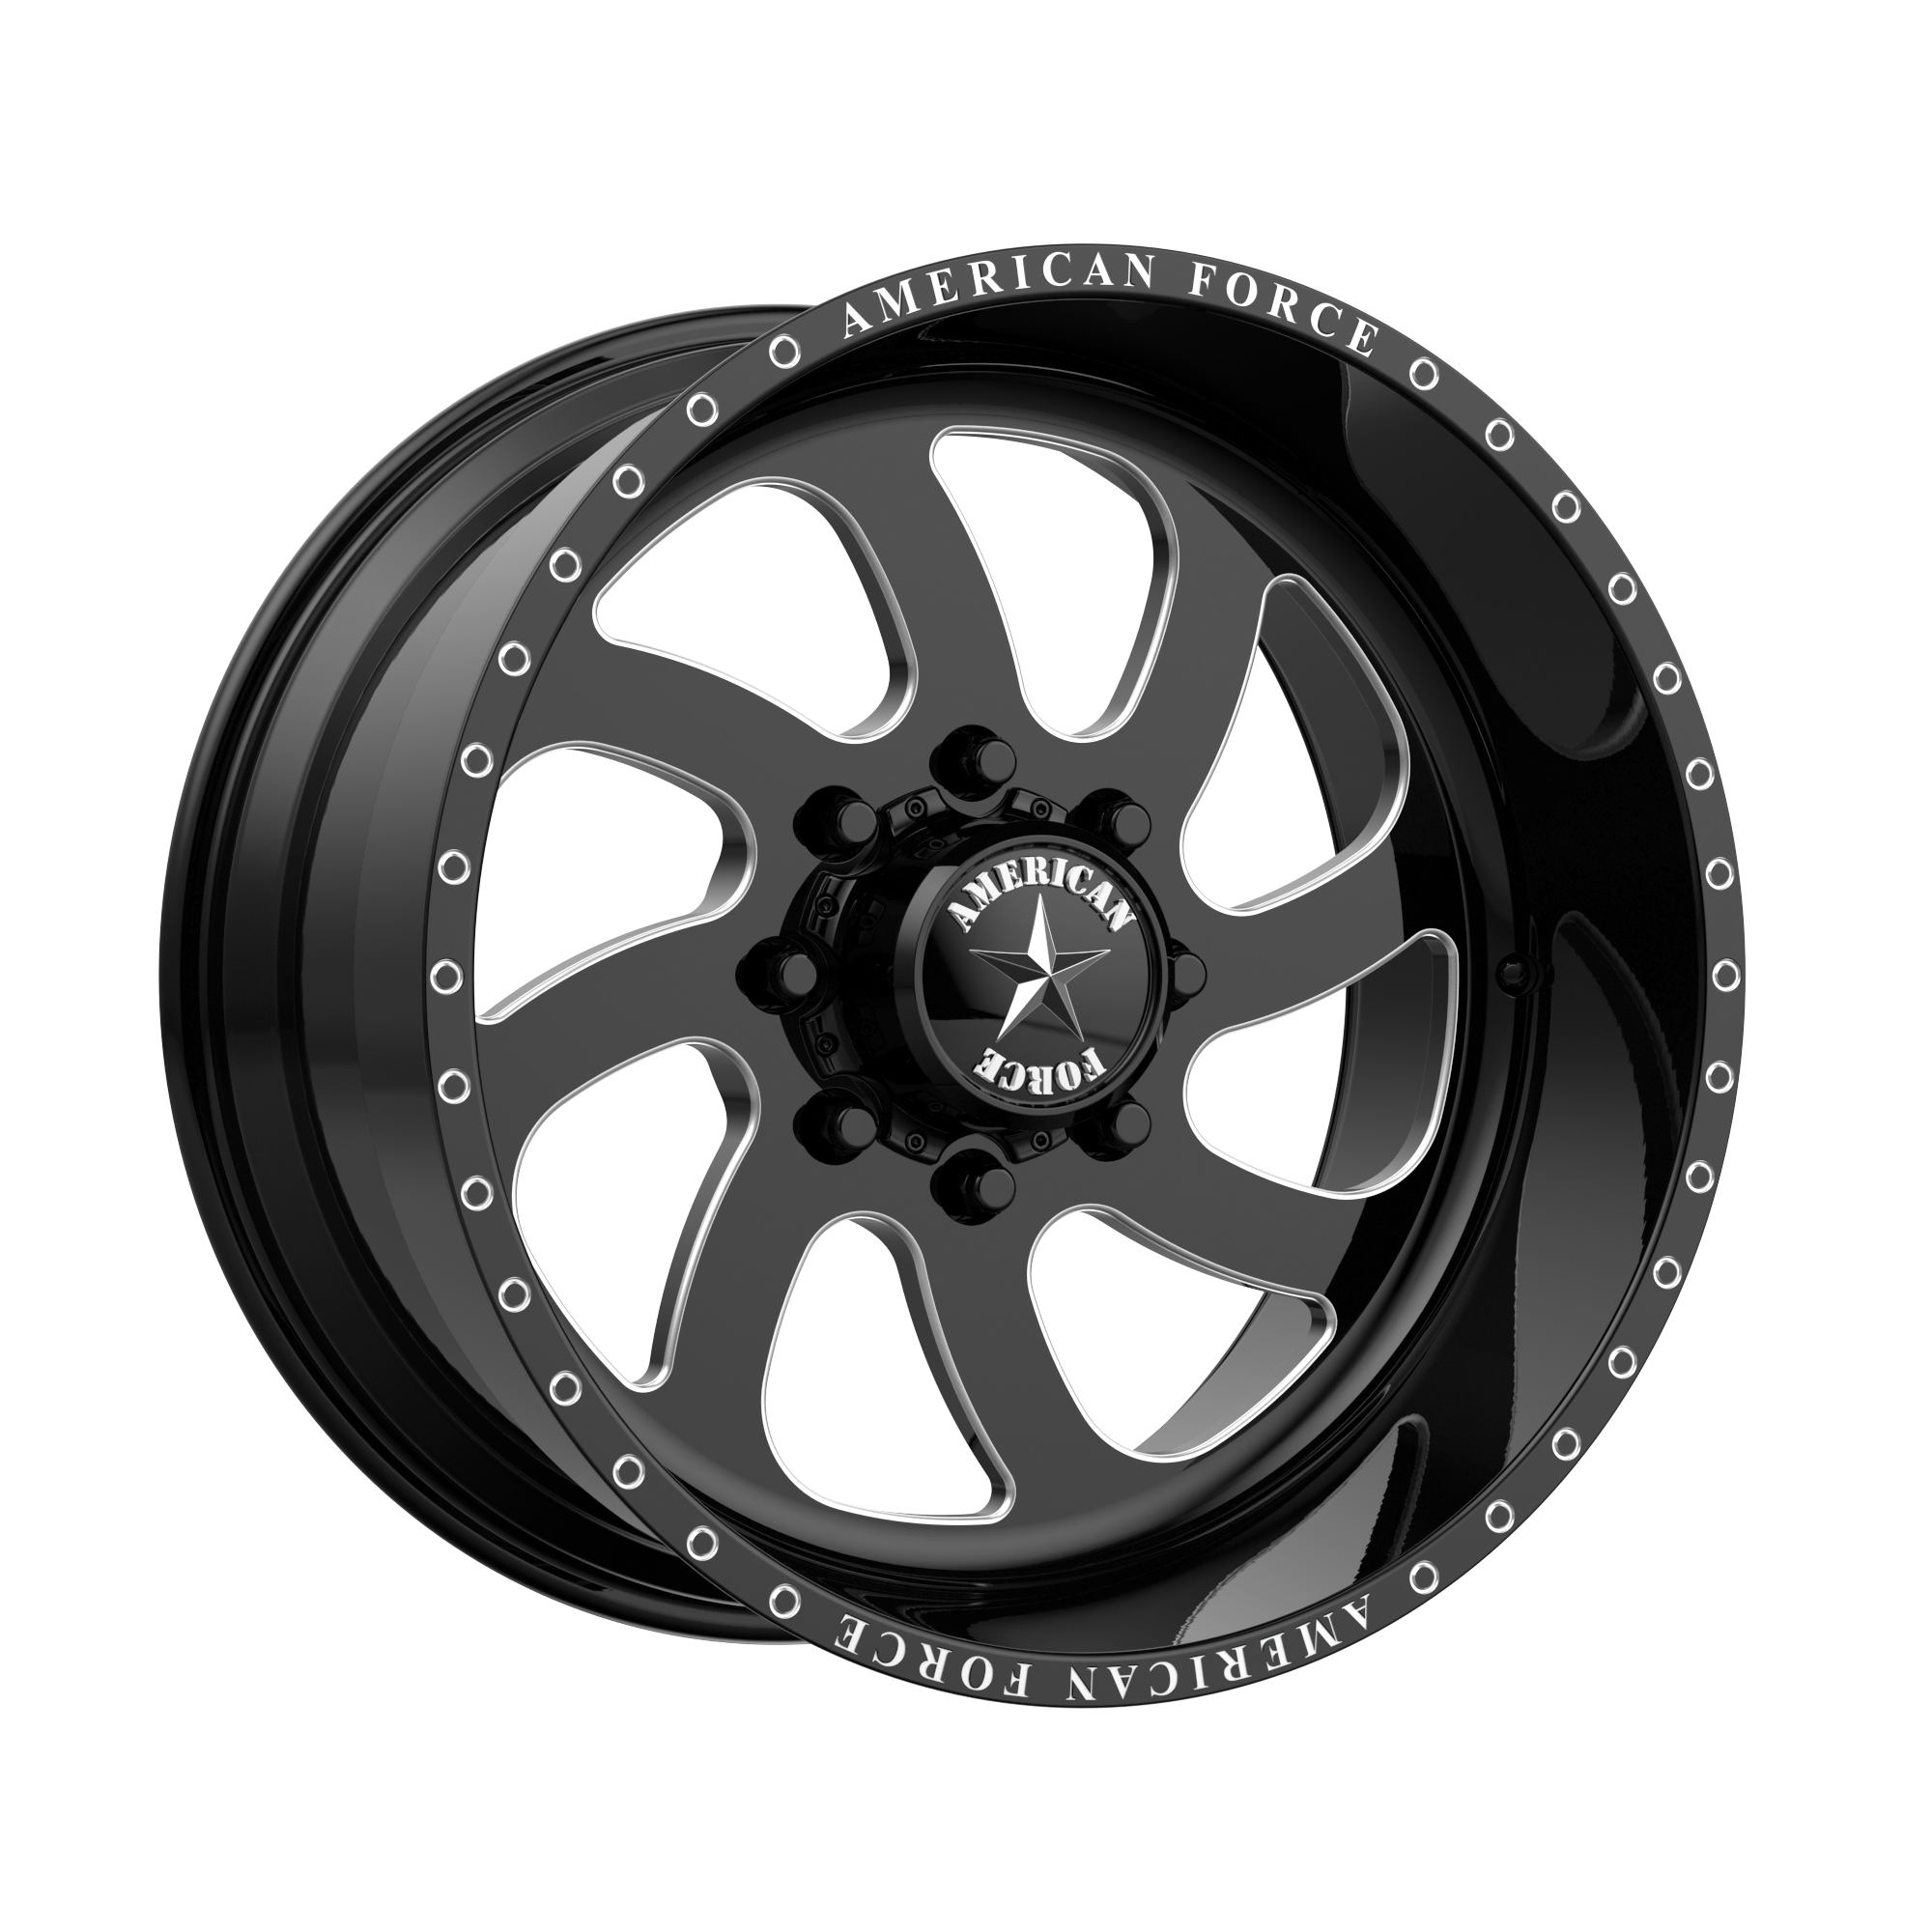 BLADE SS 26x16 8x180.00 GLOSS BLACK MACHINED (-101 mm) - Tires and Engine Performance